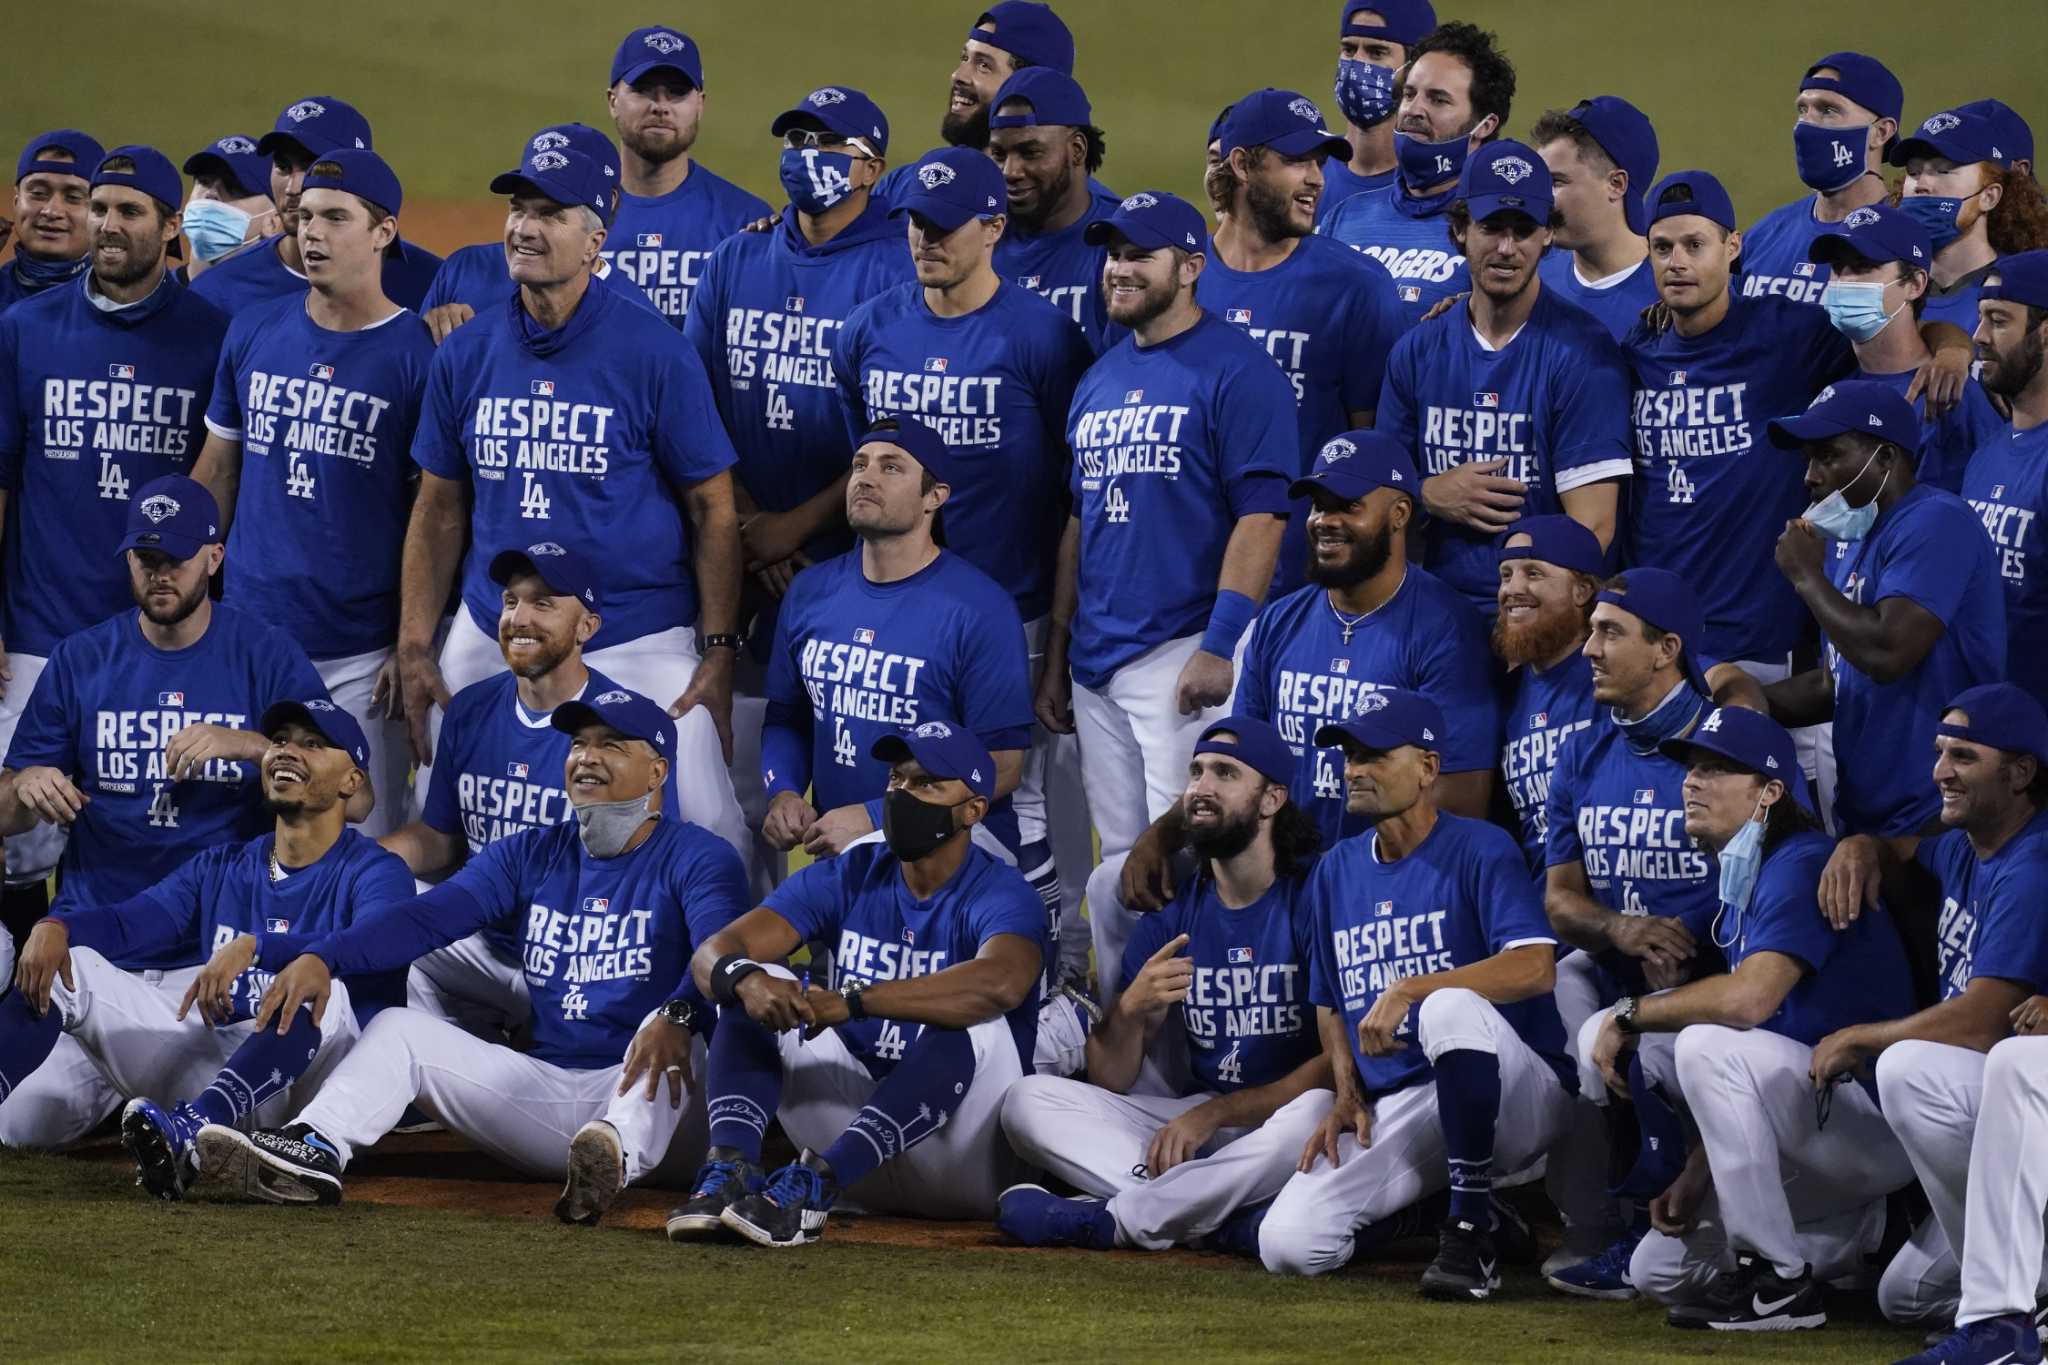 Blue Heaven: The Story of the Los Angeles Dodgers' 2020 World Series Season